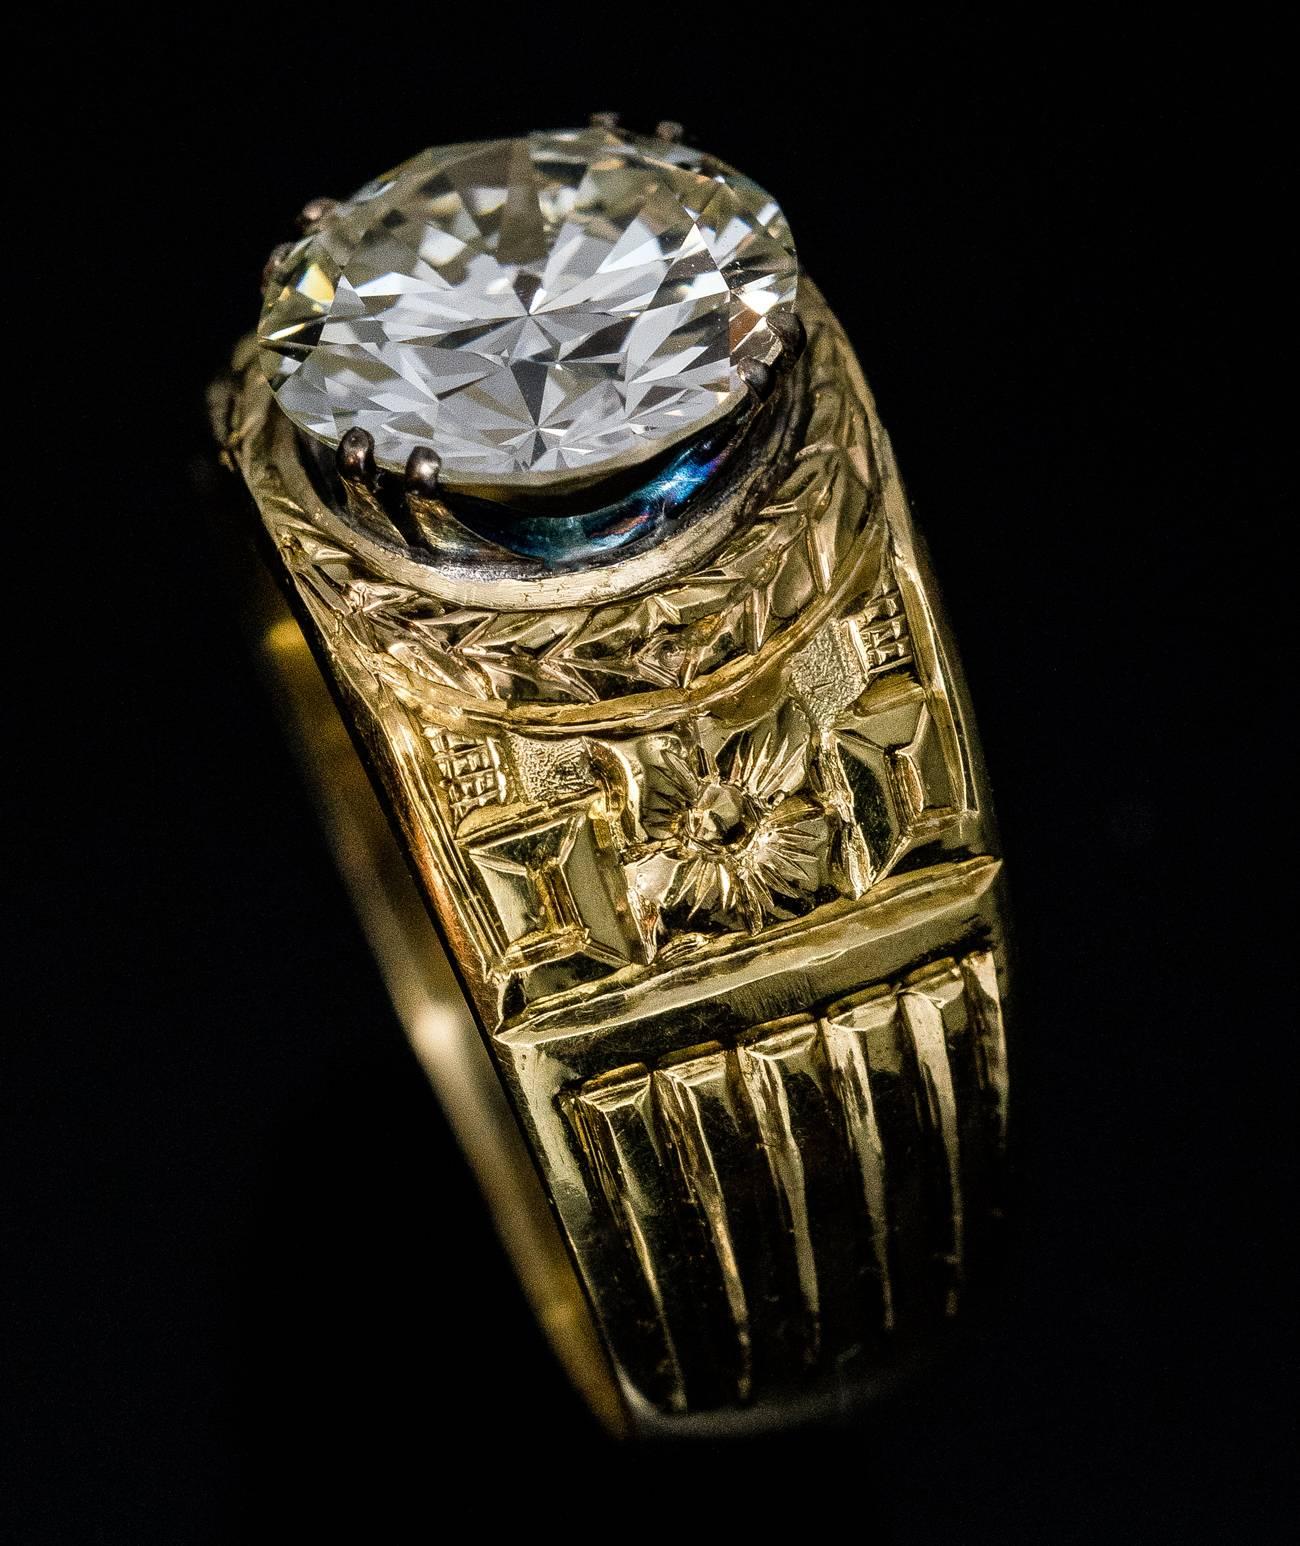 A vintage Russian 18K gold men’s ring features a 3.48 ct transitional (1930s) brilliant cut diamond set in silver prongs. The diamond is encircled by a carved laurel wreath and flanked by floral and geometric designs.
The diamond measures 9.85 x 5.7